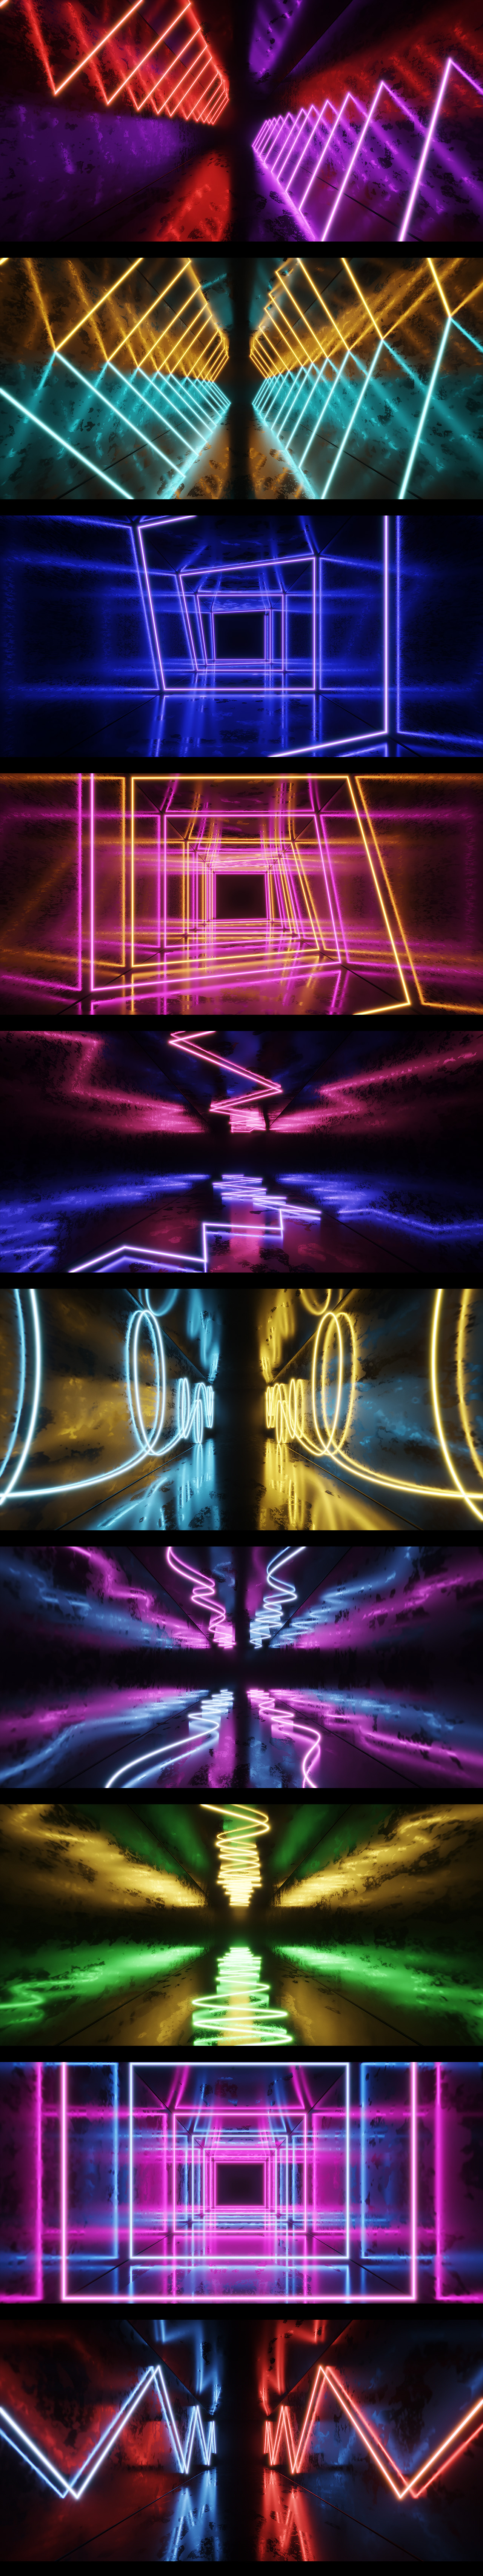 Neon Scenes Abstract Neon Background Images